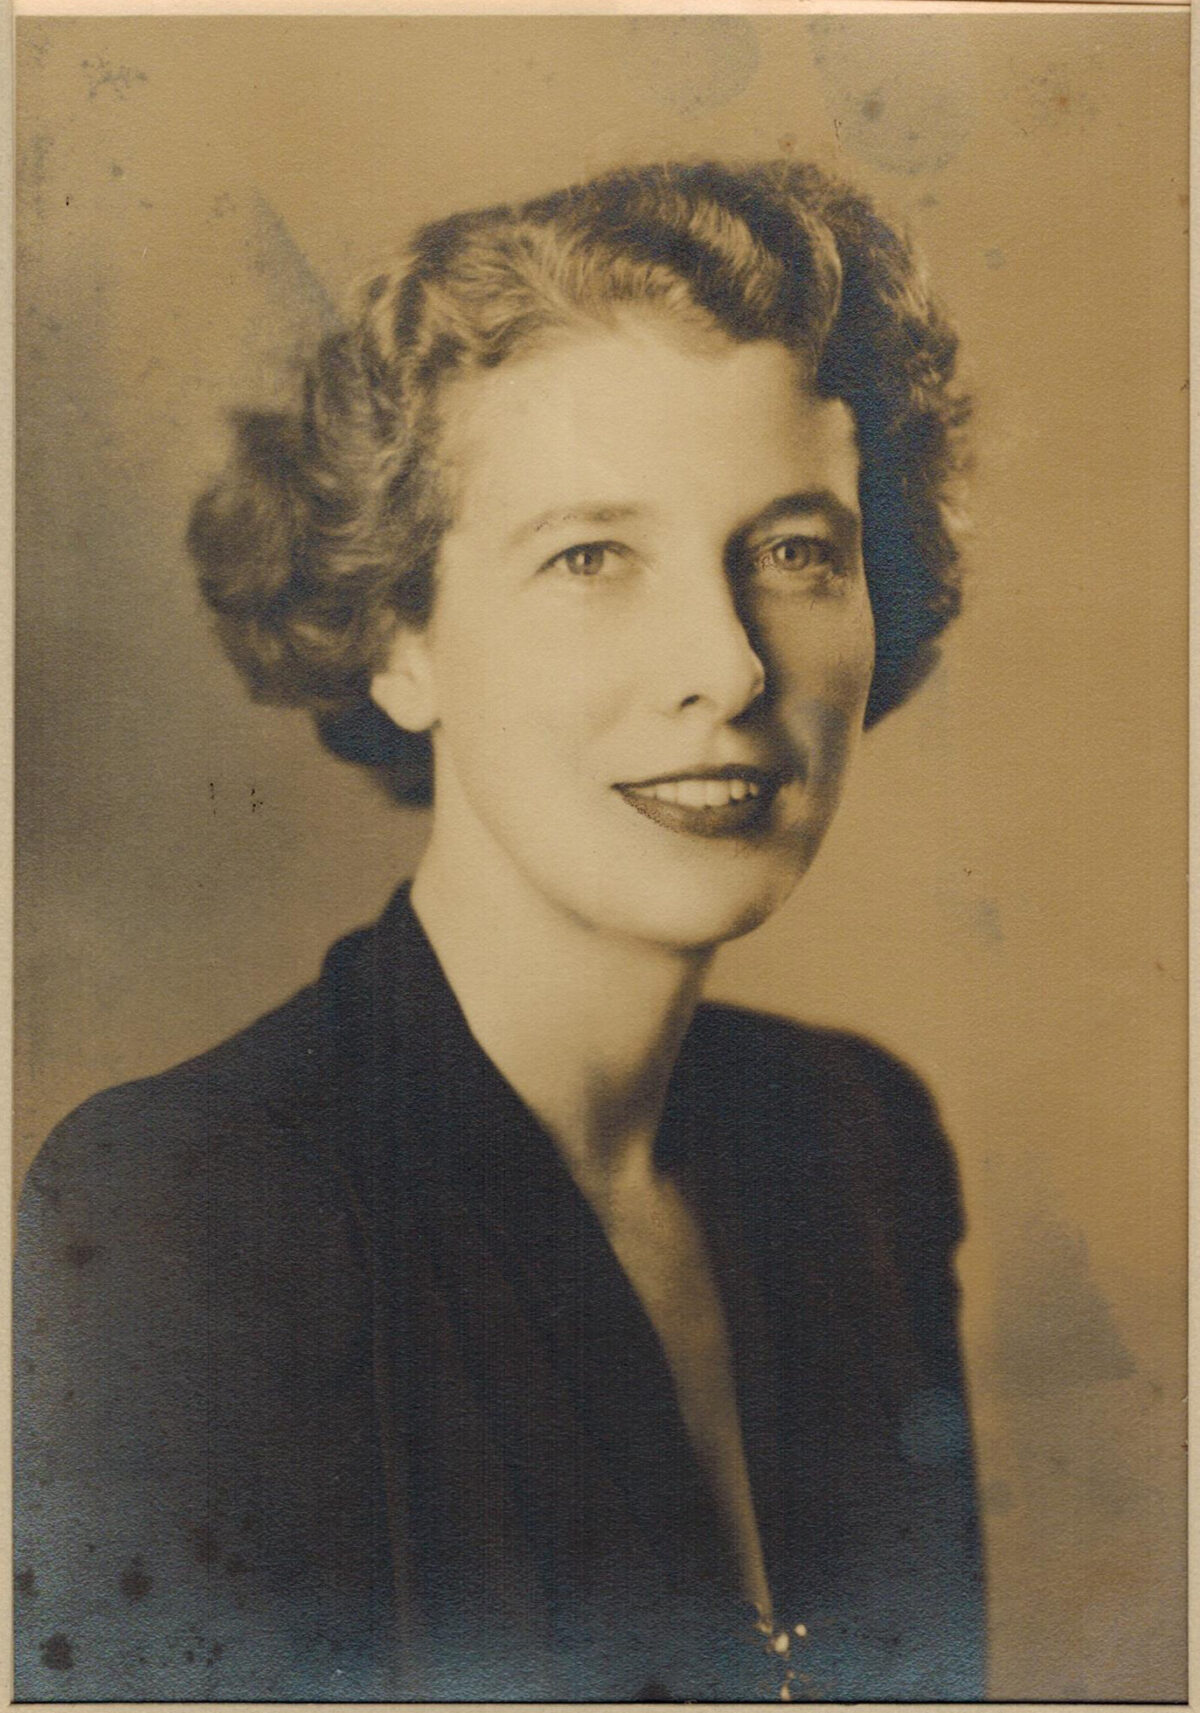 A portrait photo of scientist Florence Bell